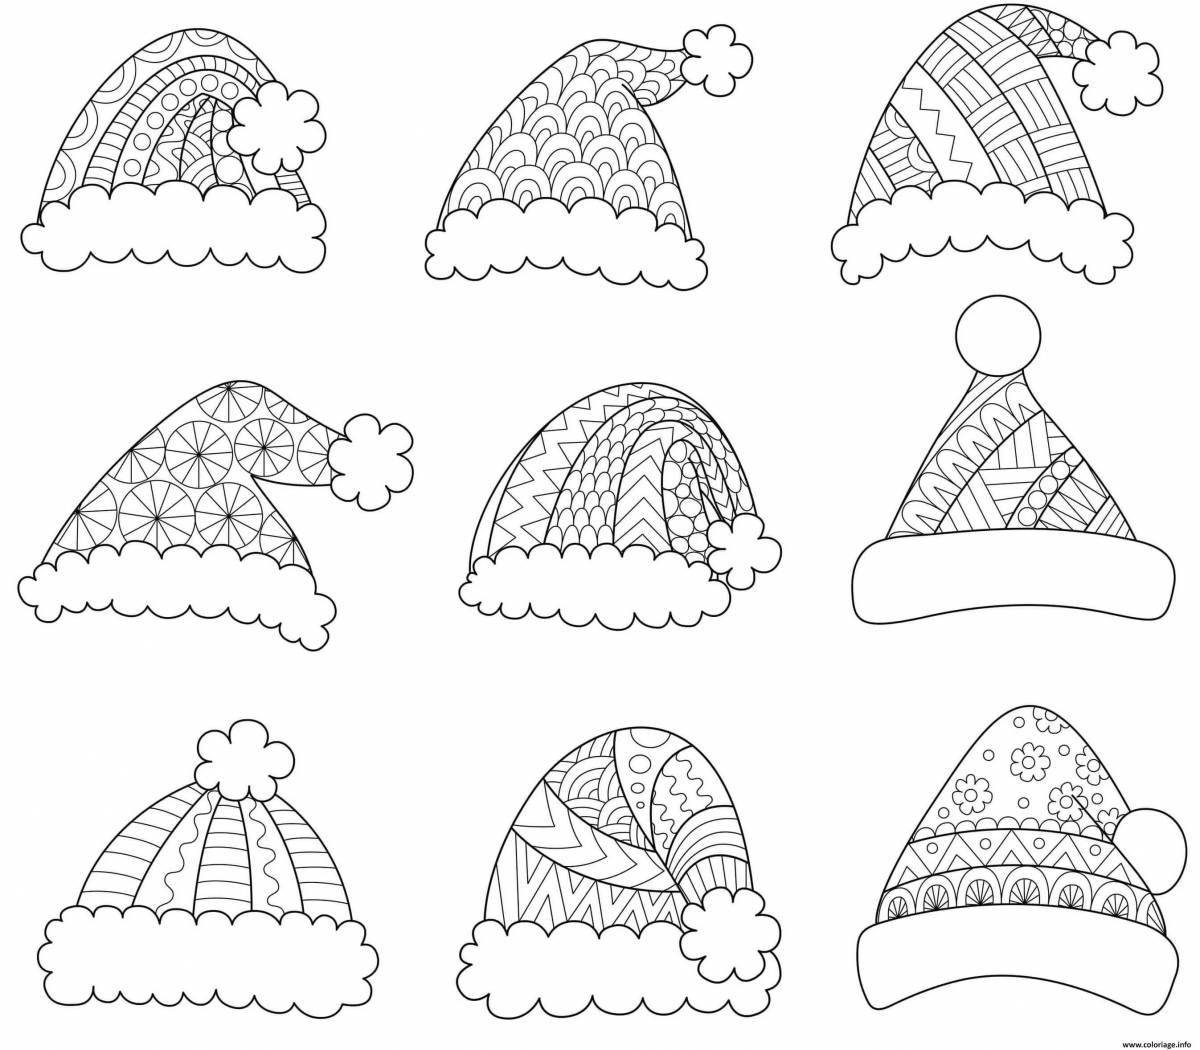 Dazzling Christmas hat coloring book